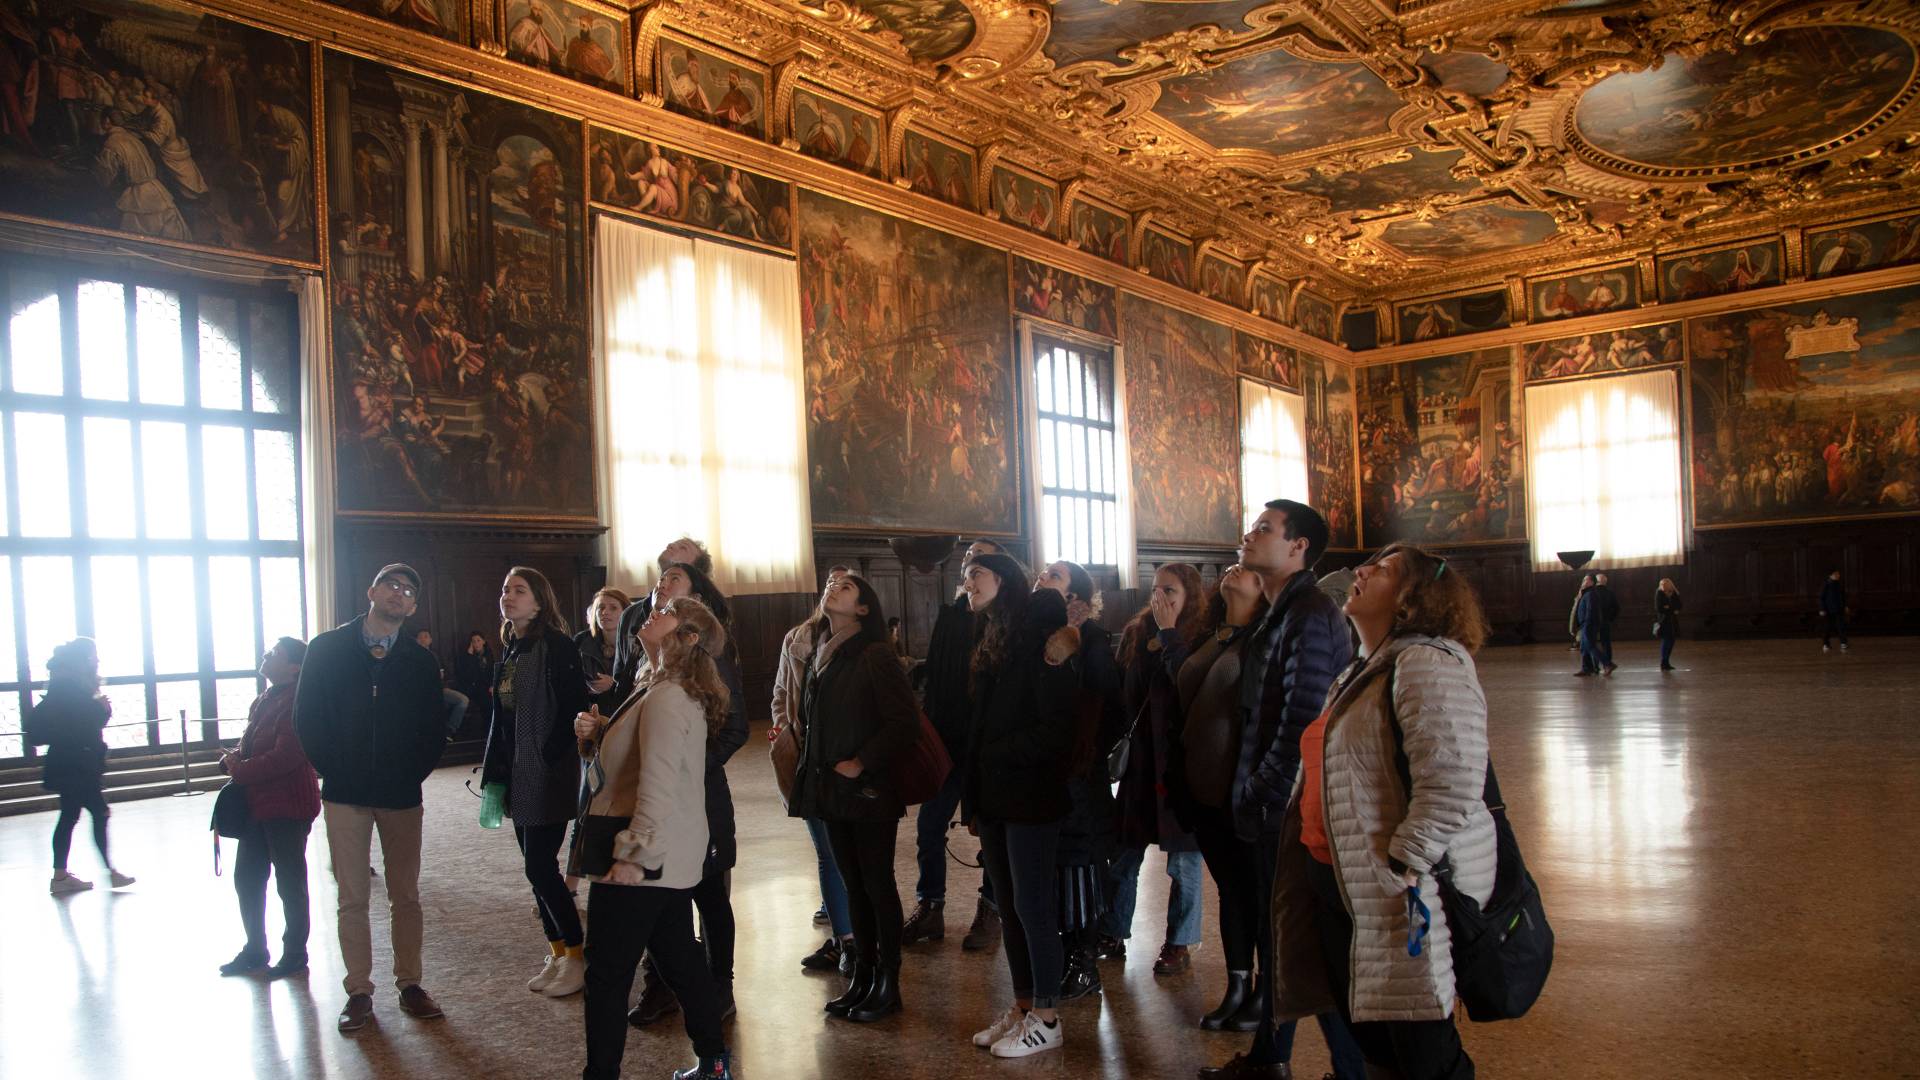 Students looking up at ceiling in Doge's Palace in Venice